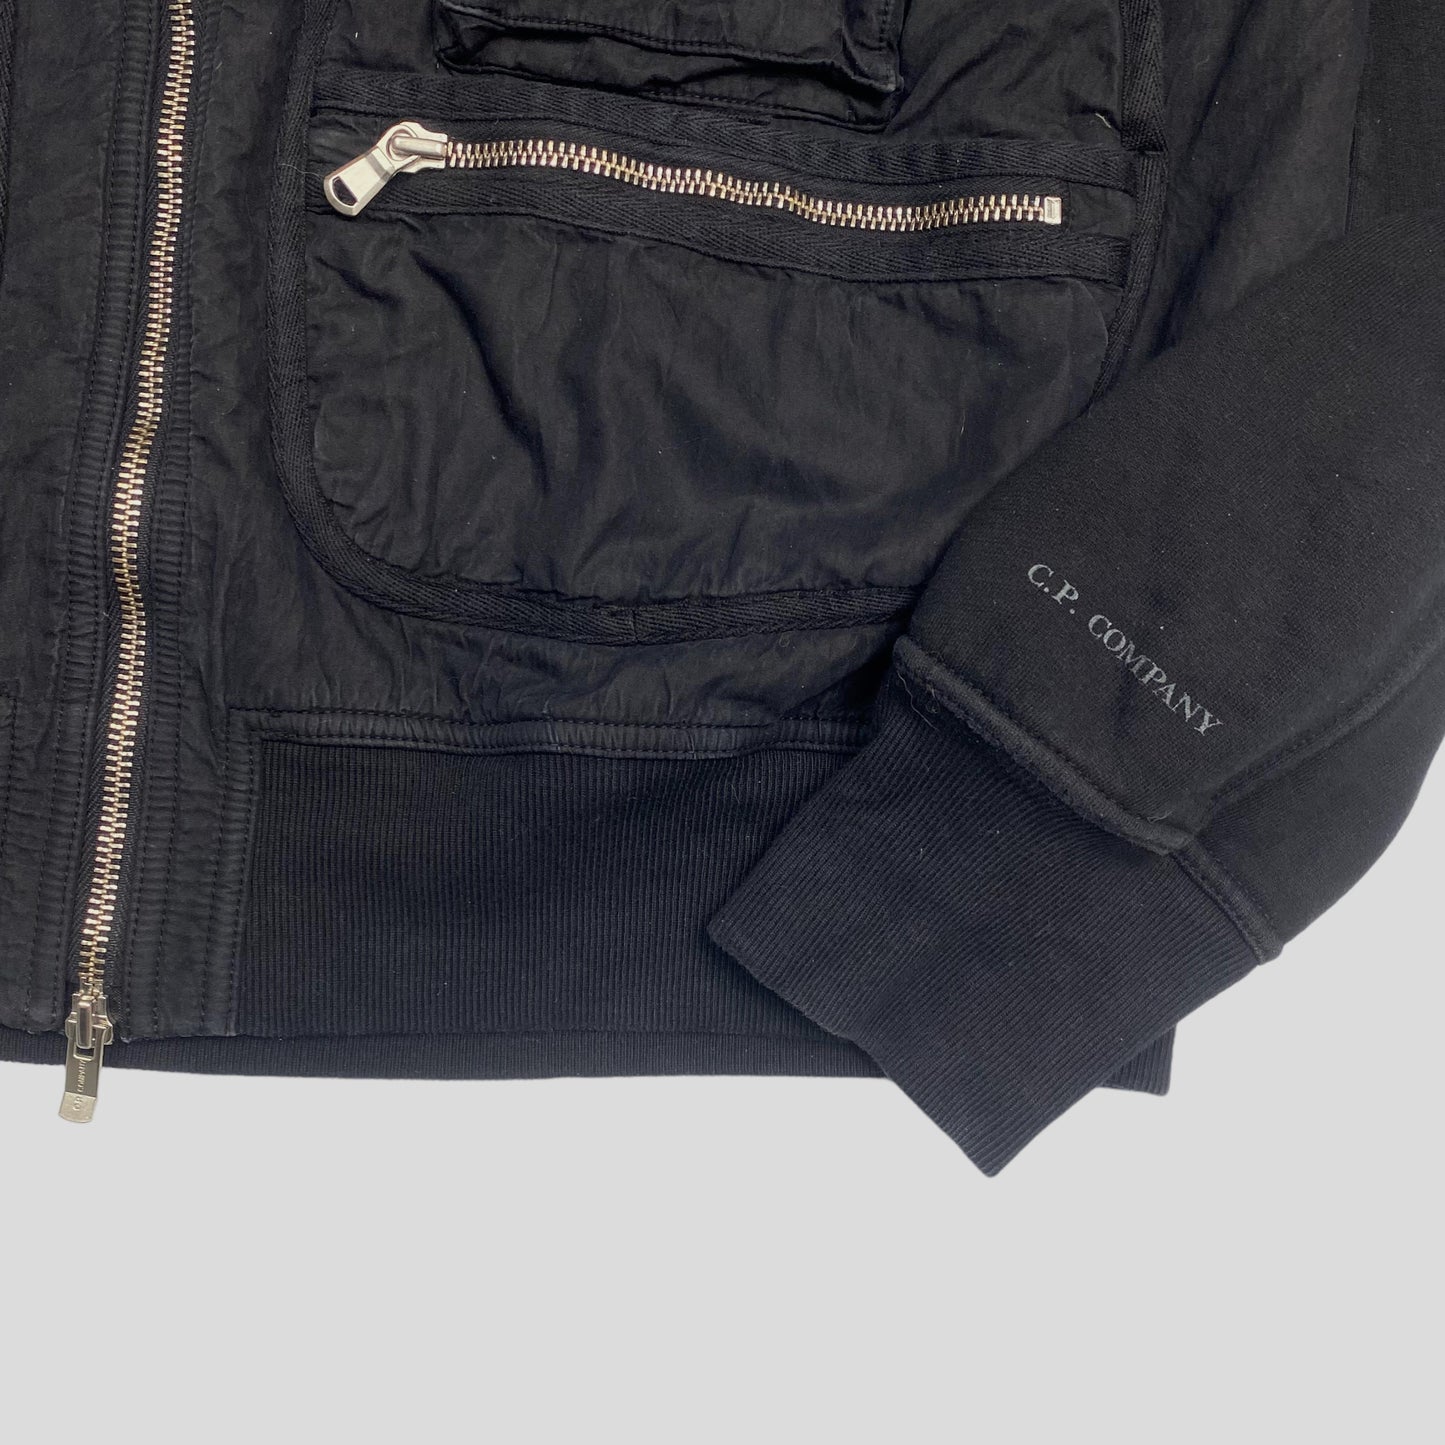 CP Company 2004 Urban Protection Multipocket Jacket - L/XL